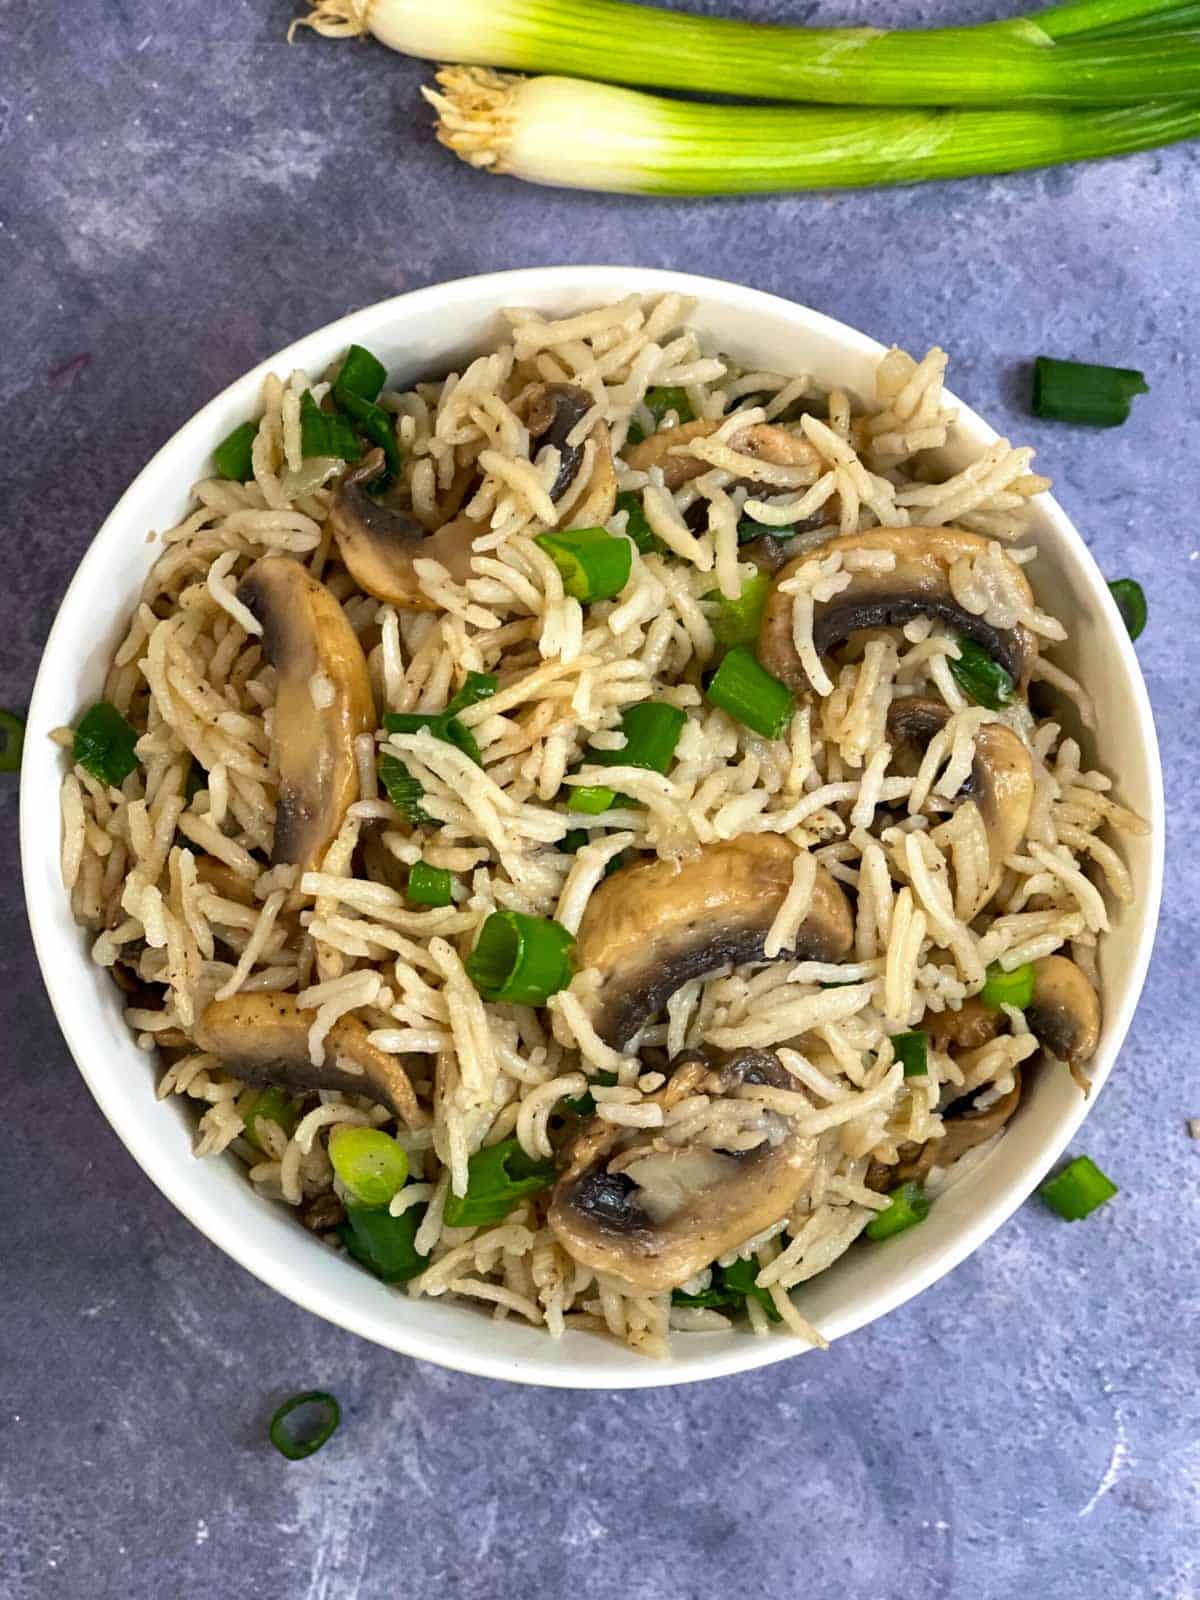 mushroom pilaf in a bowl garnished with green onions